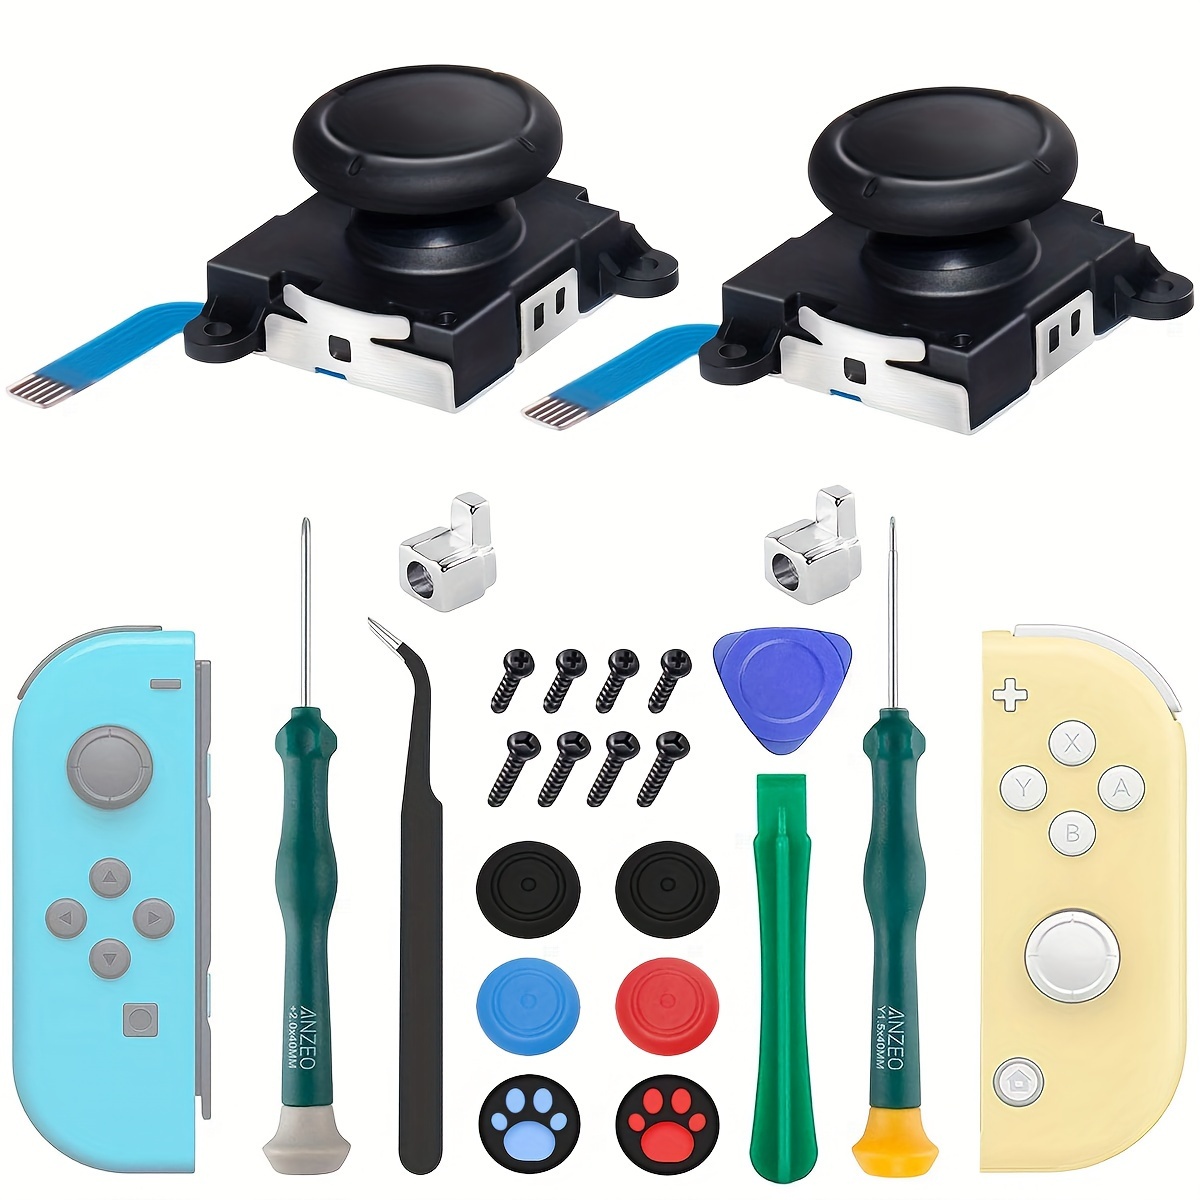 

2 Packs Joycon Joysticks, Joycon Repair Kit Joystick Replacement Parts For Switch, Switch Lite & Switch Oled, Include Thumb Grips, Metal Lock Buckles